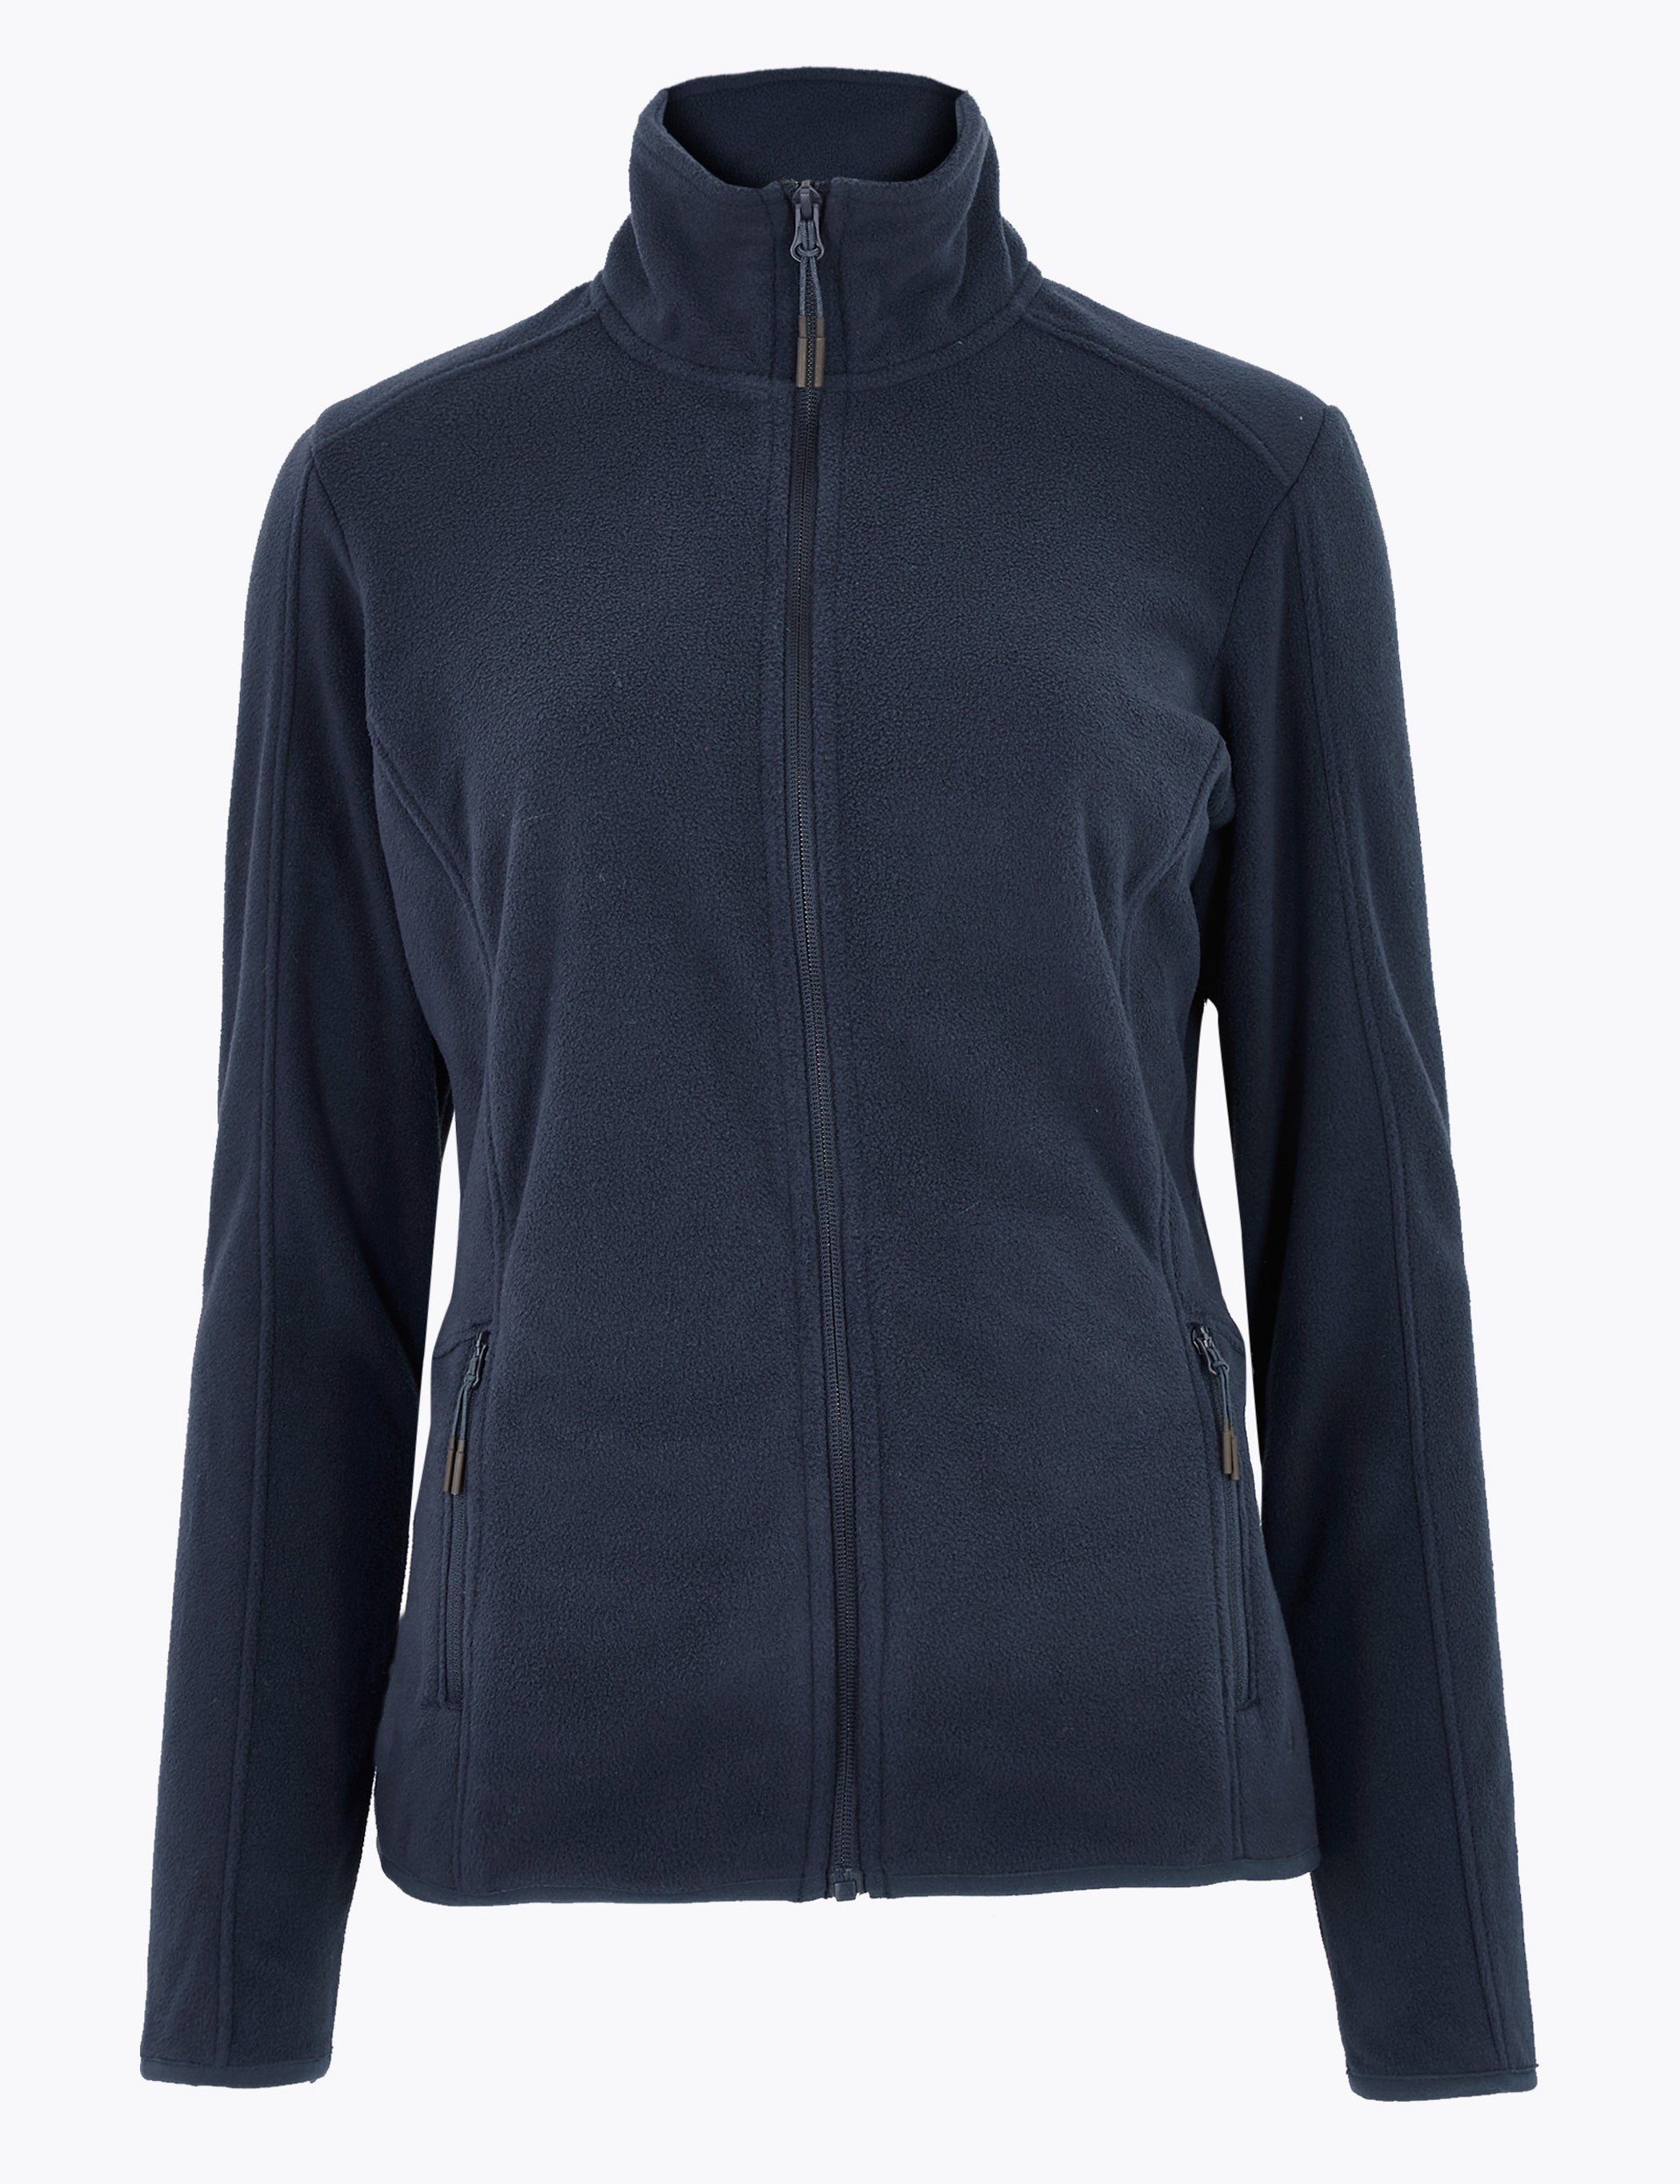 Fleeces are back in fashion – 5 snuggly jackets to buy now